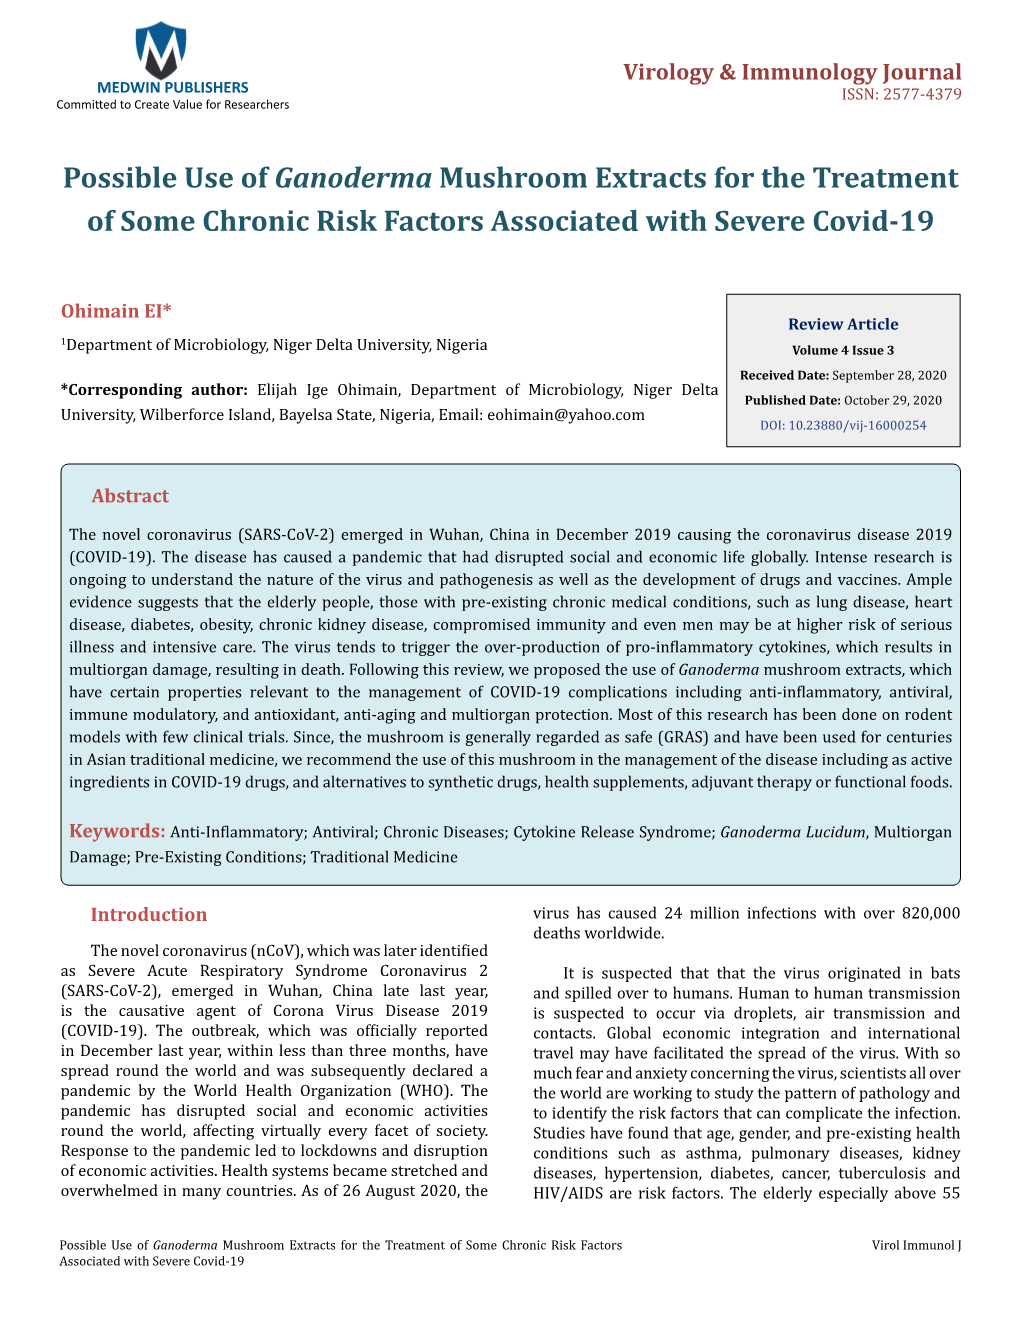 Possible Use of Ganoderma Mushroom Extracts for the Treatment of Some Chronic Risk Factors Associated with Severe Covid-19